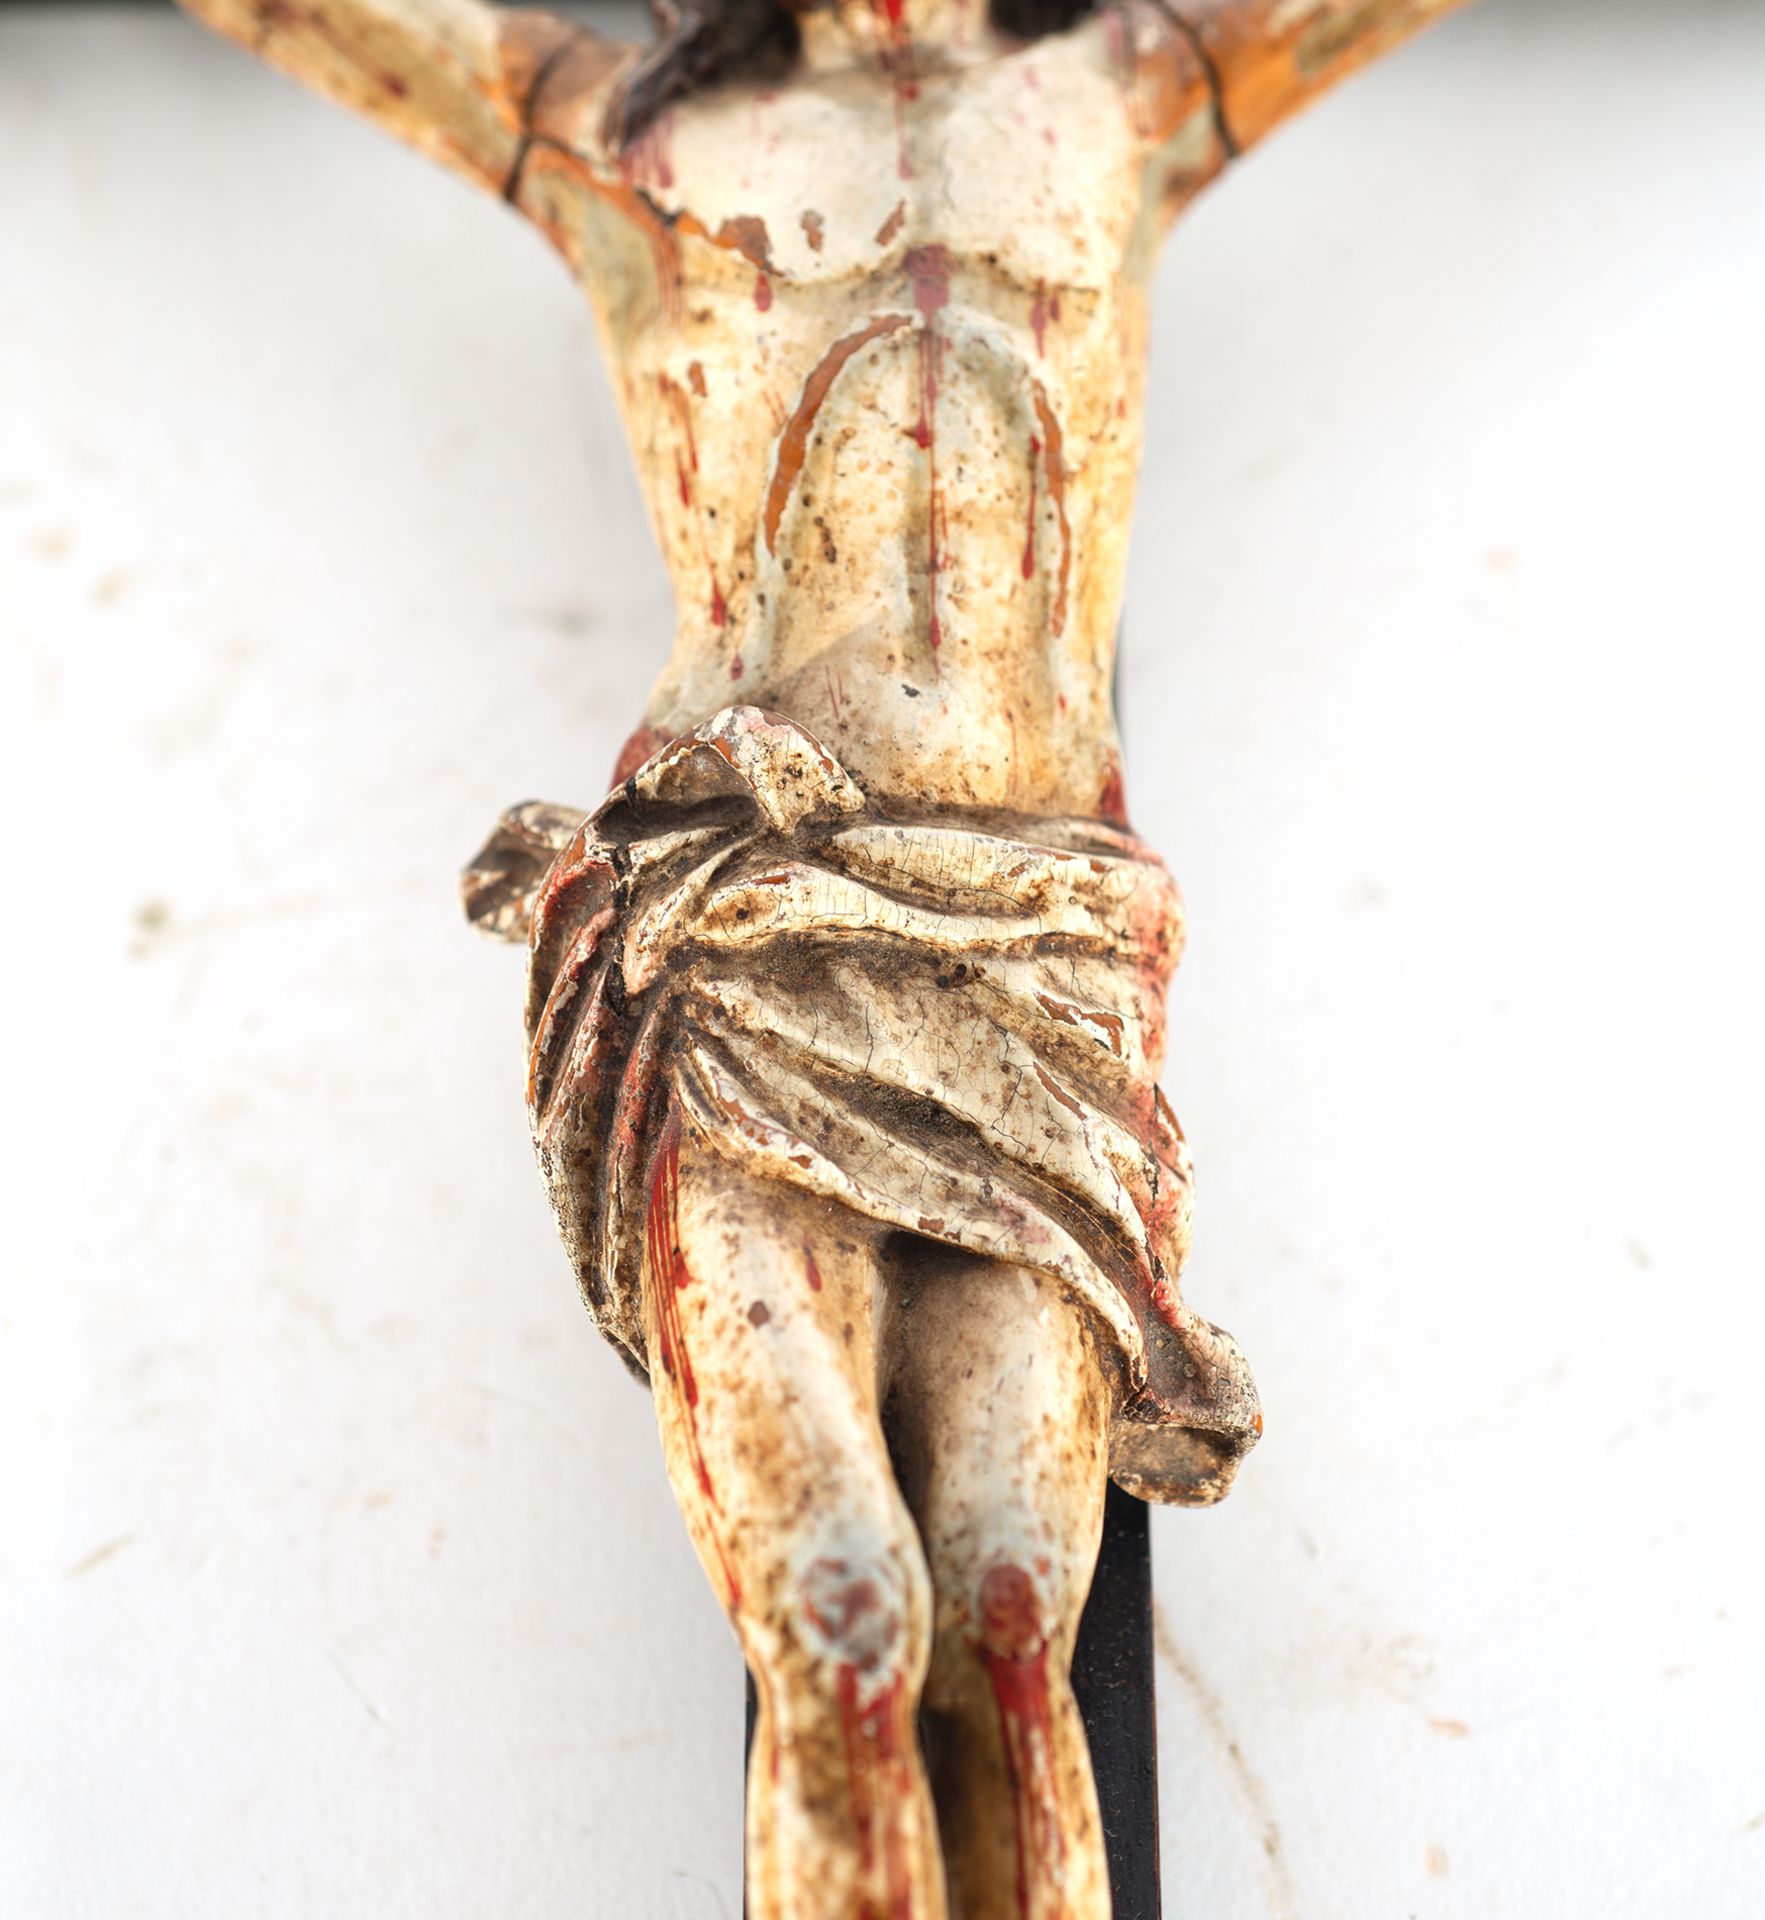 Christ on the Cross from Quito, 18th century - Image 3 of 4